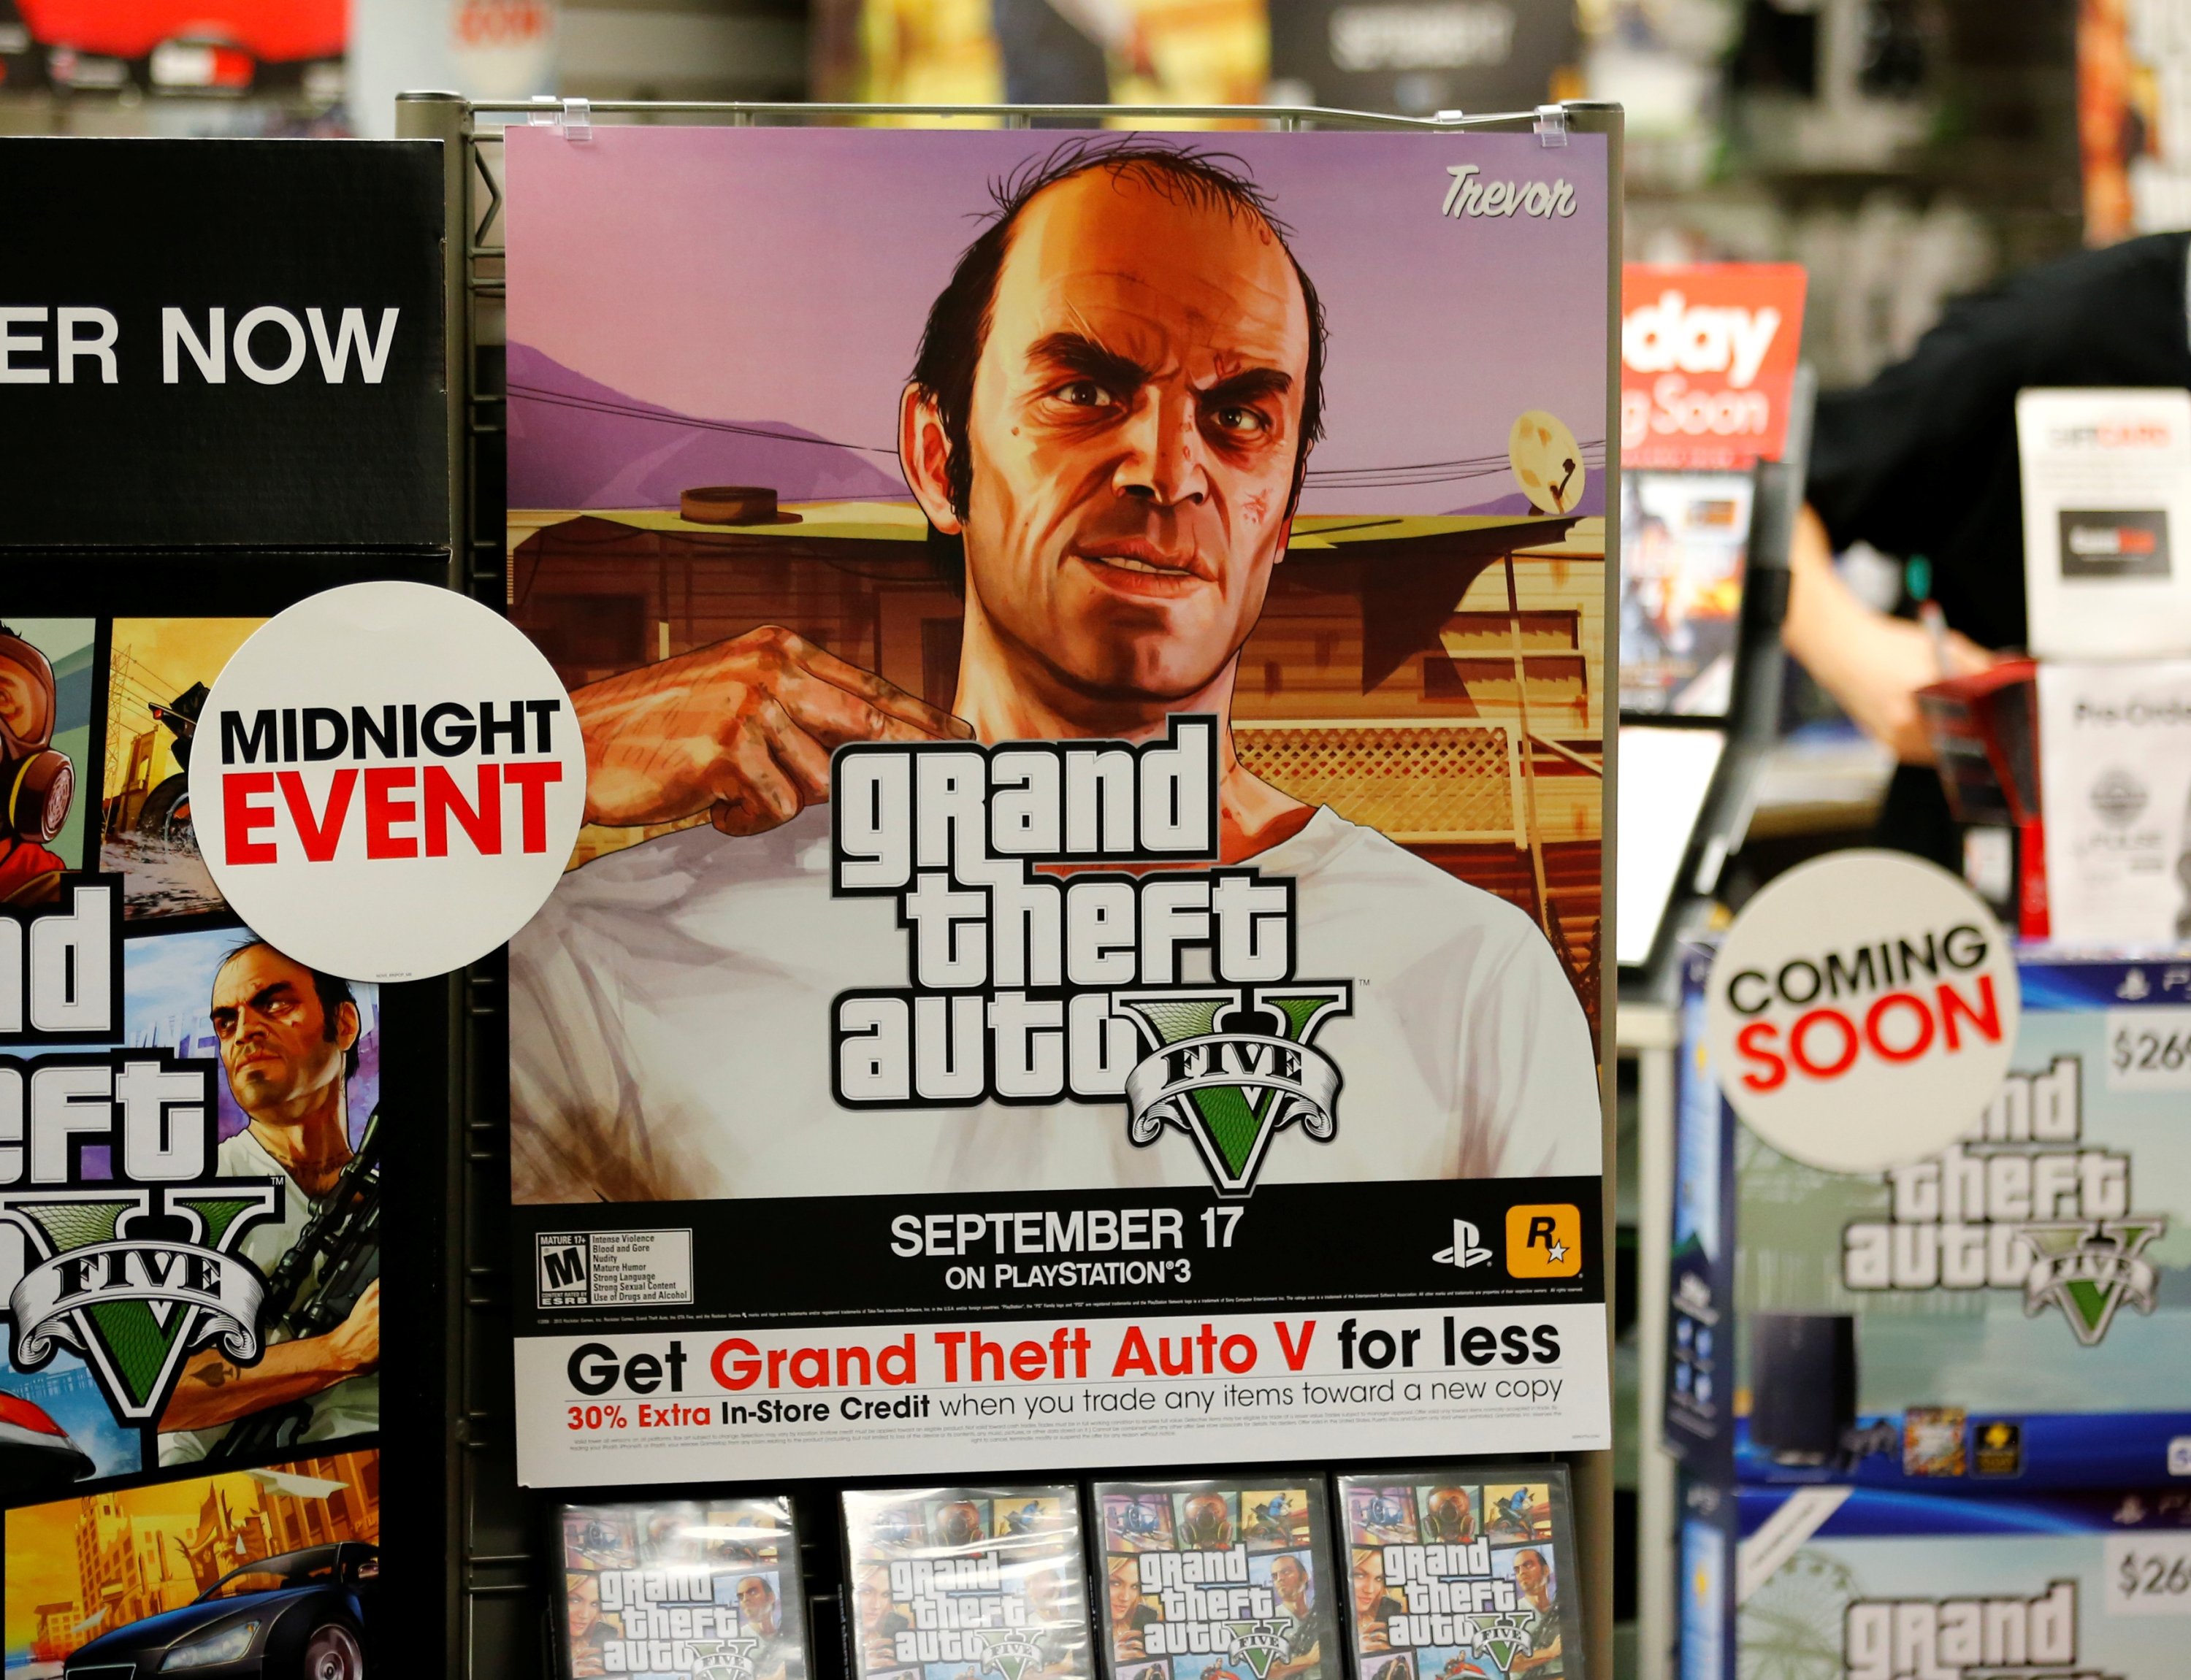 A promotion for the computer game 'Grand Theft Auto IV' is shown in a Game Stop store in Encinitas, California, Sept. 17, 2013. (REUTERS Photo)